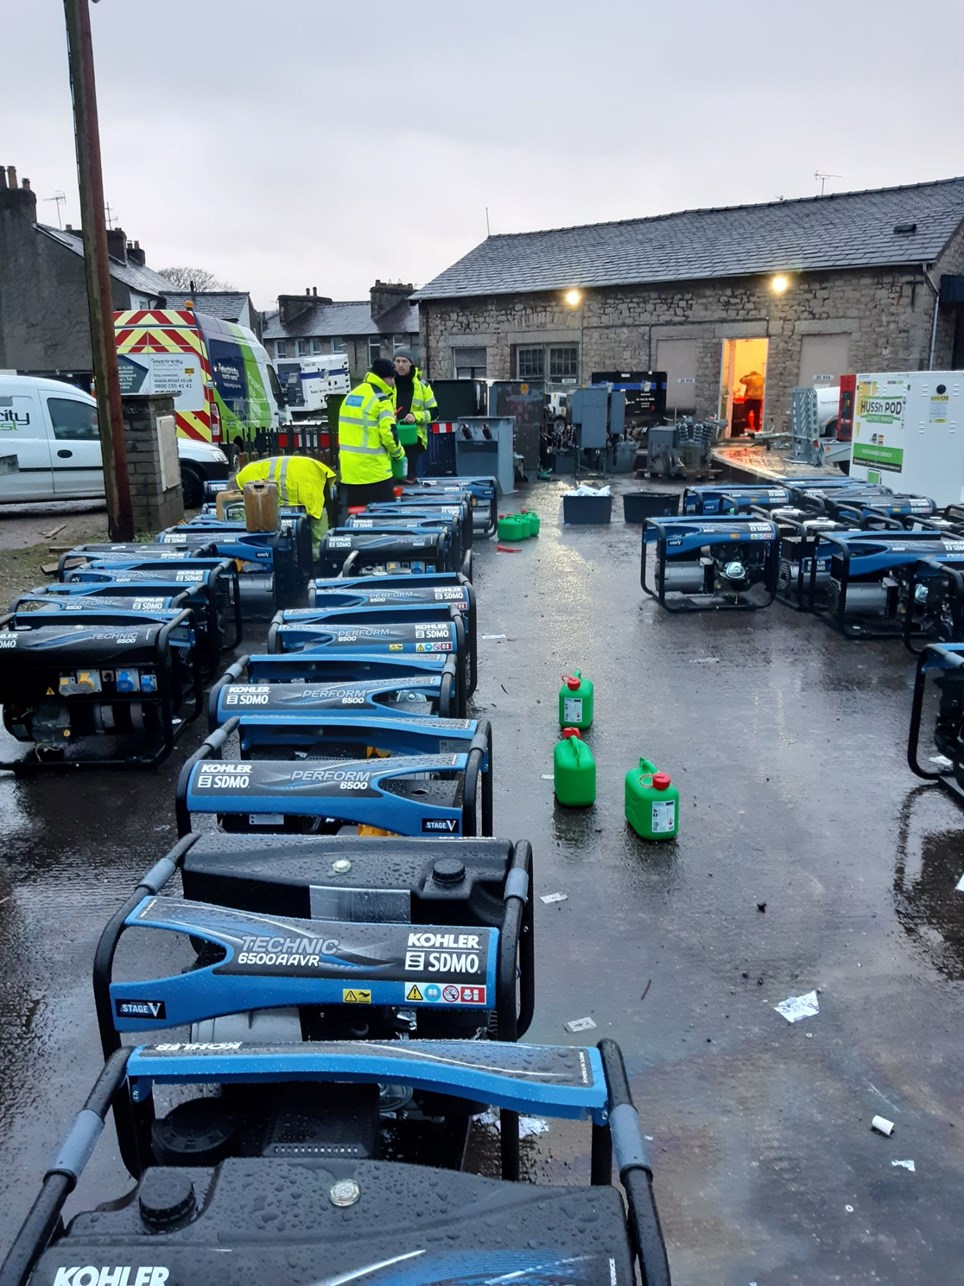 Generators from Southampton being deployed from Kendal 2